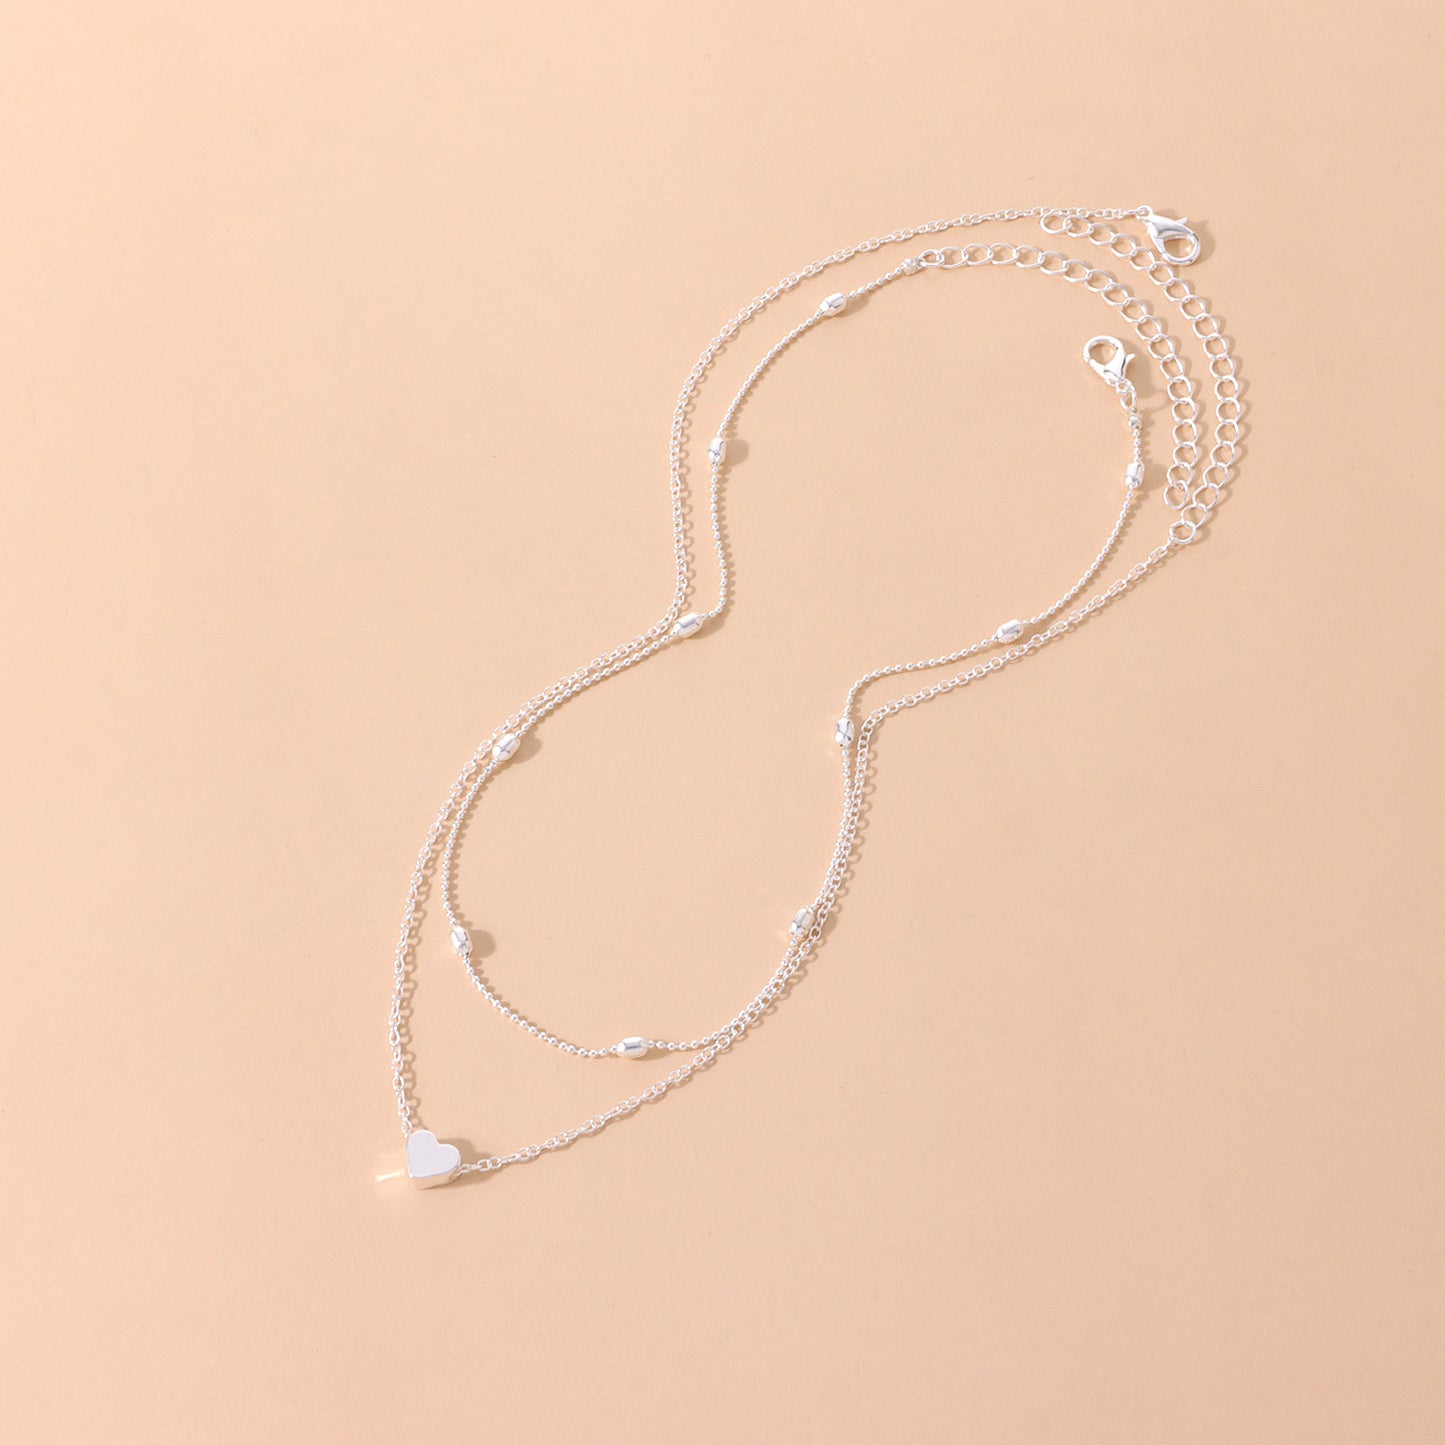 Fashion Heart Shape Alloy Plating Layered Necklaces